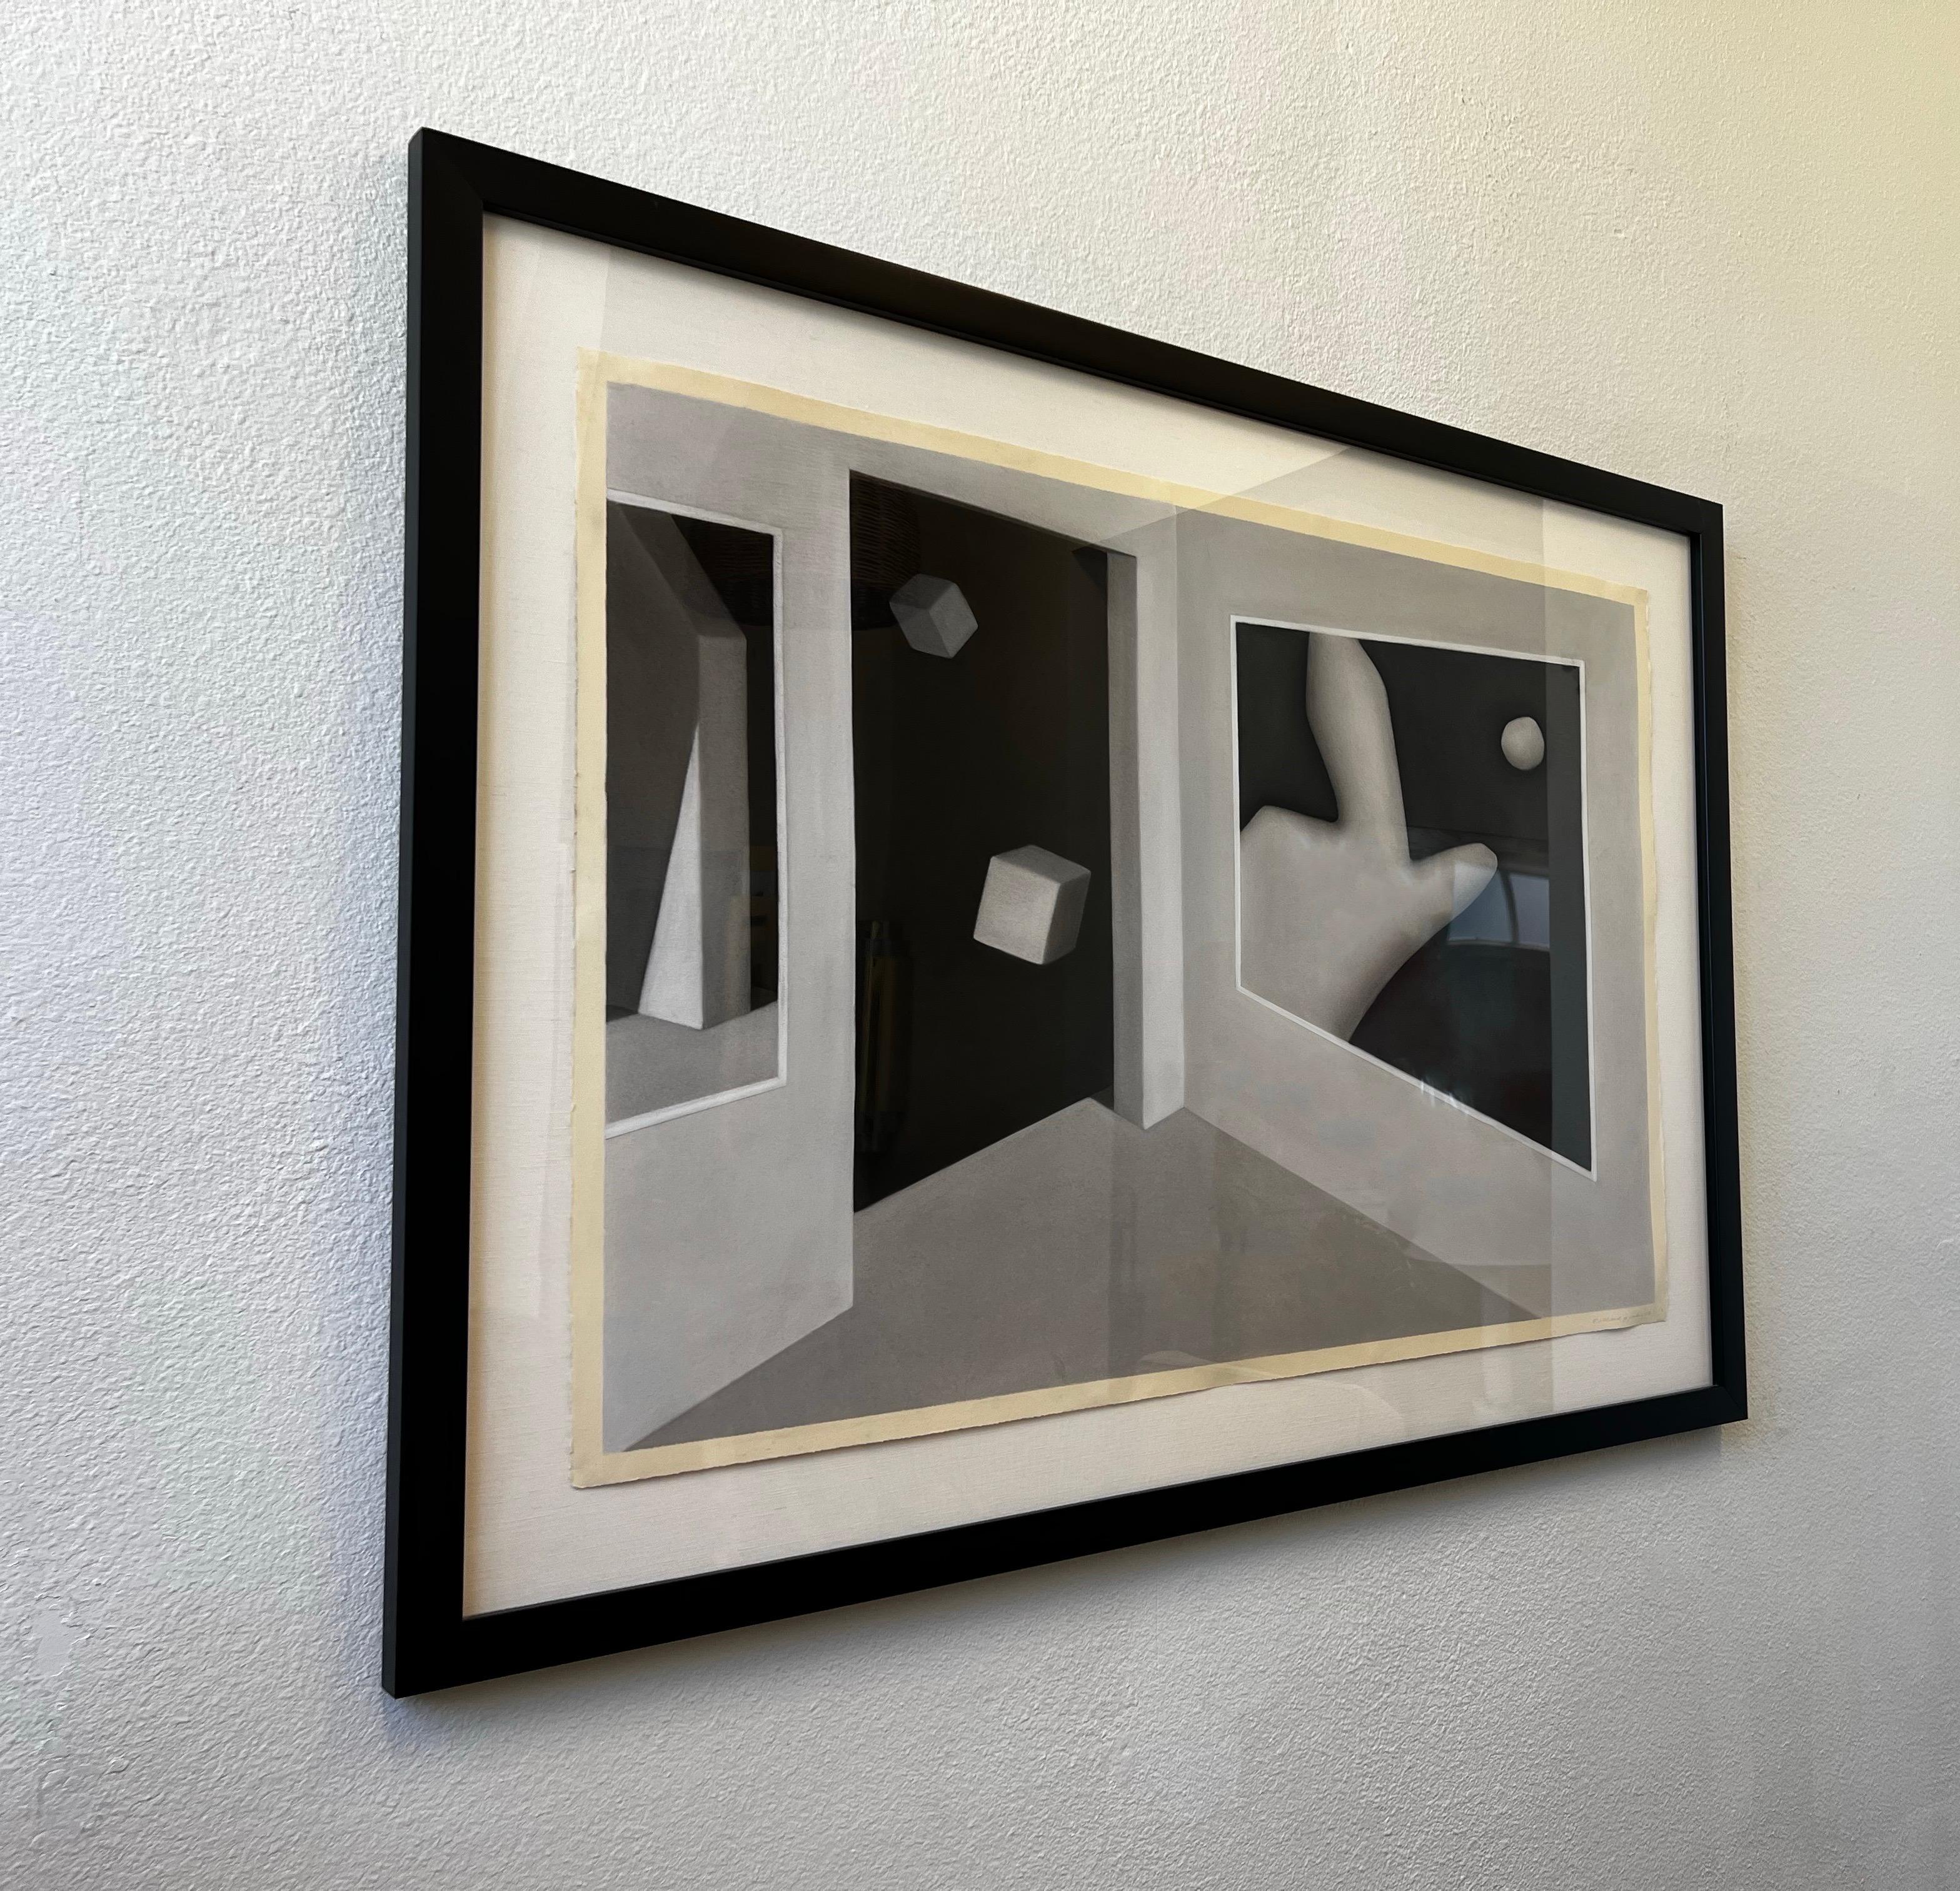 Large 1986 Surreal charcoal on paper by American artist Richard Parker. 

Pencil signed Richard G. Parker 1986 on the right bottom corner. 
Newly framed with a black lacquered wood frame and UV protected acrylic. 

Measurements with frame: 53”